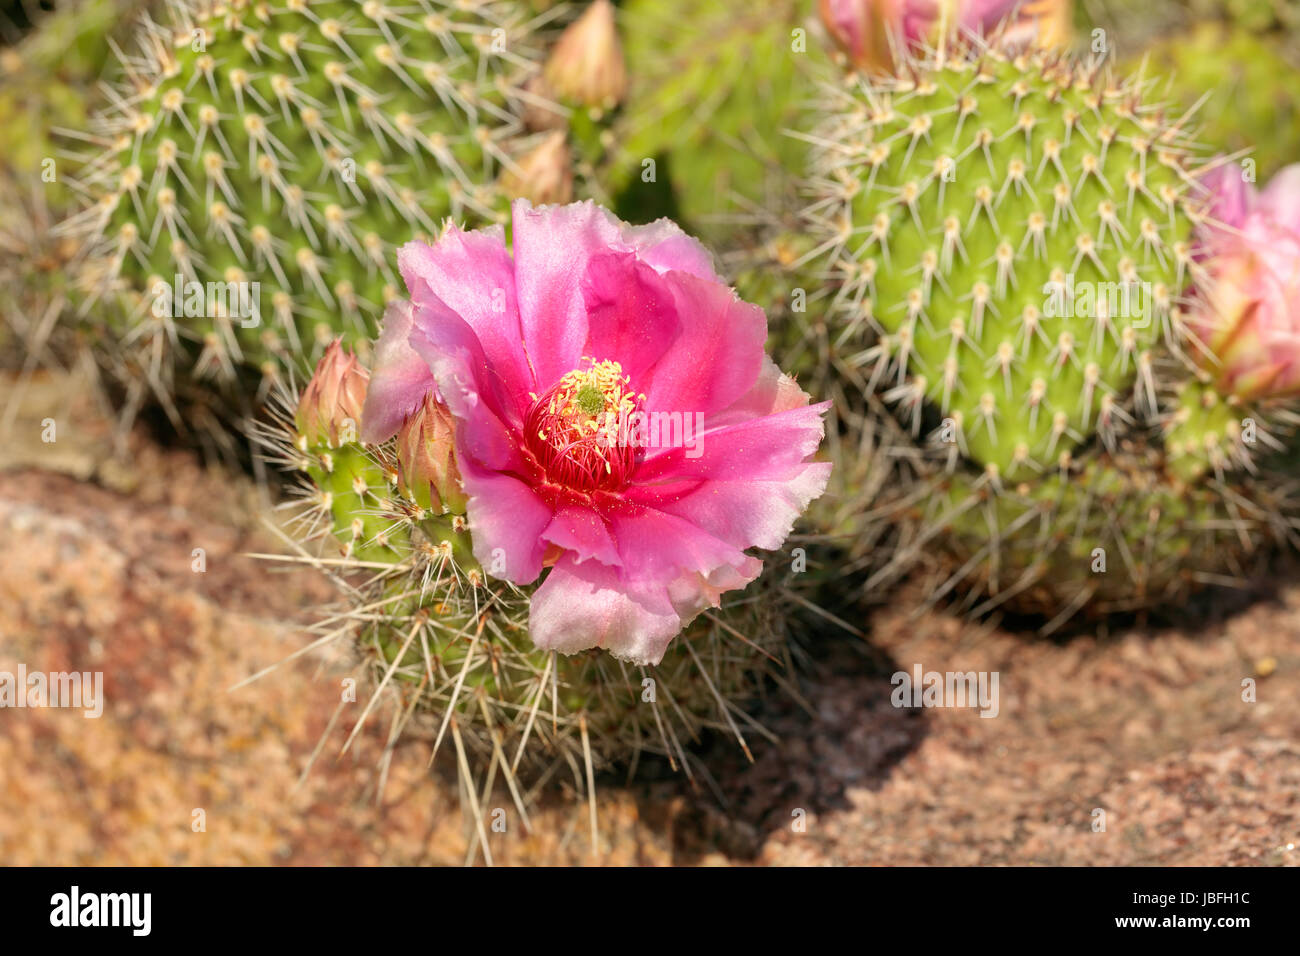 Opuntia phaeacantha blossomed in pink colors Stock Photo